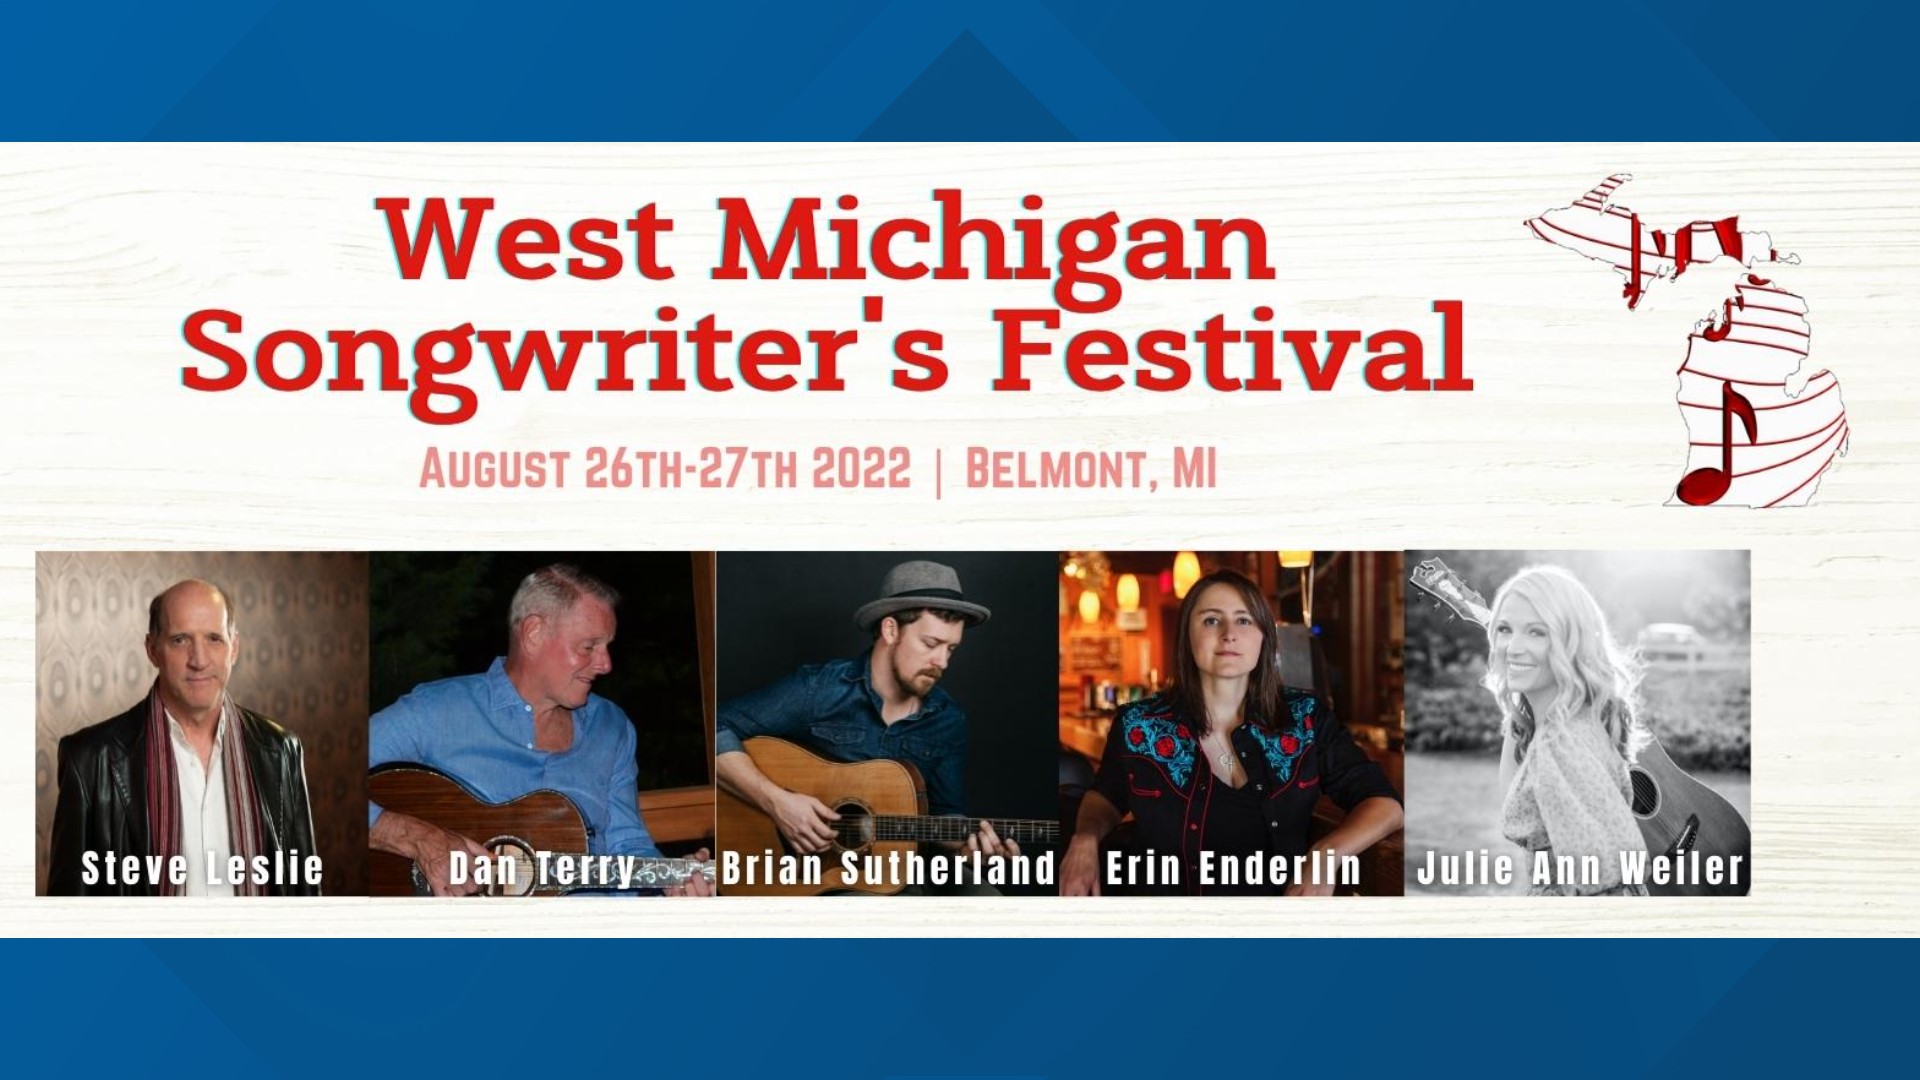 Along with two nights of performances, attendees can participate in a songwriting workshop on Saturday afternoon.